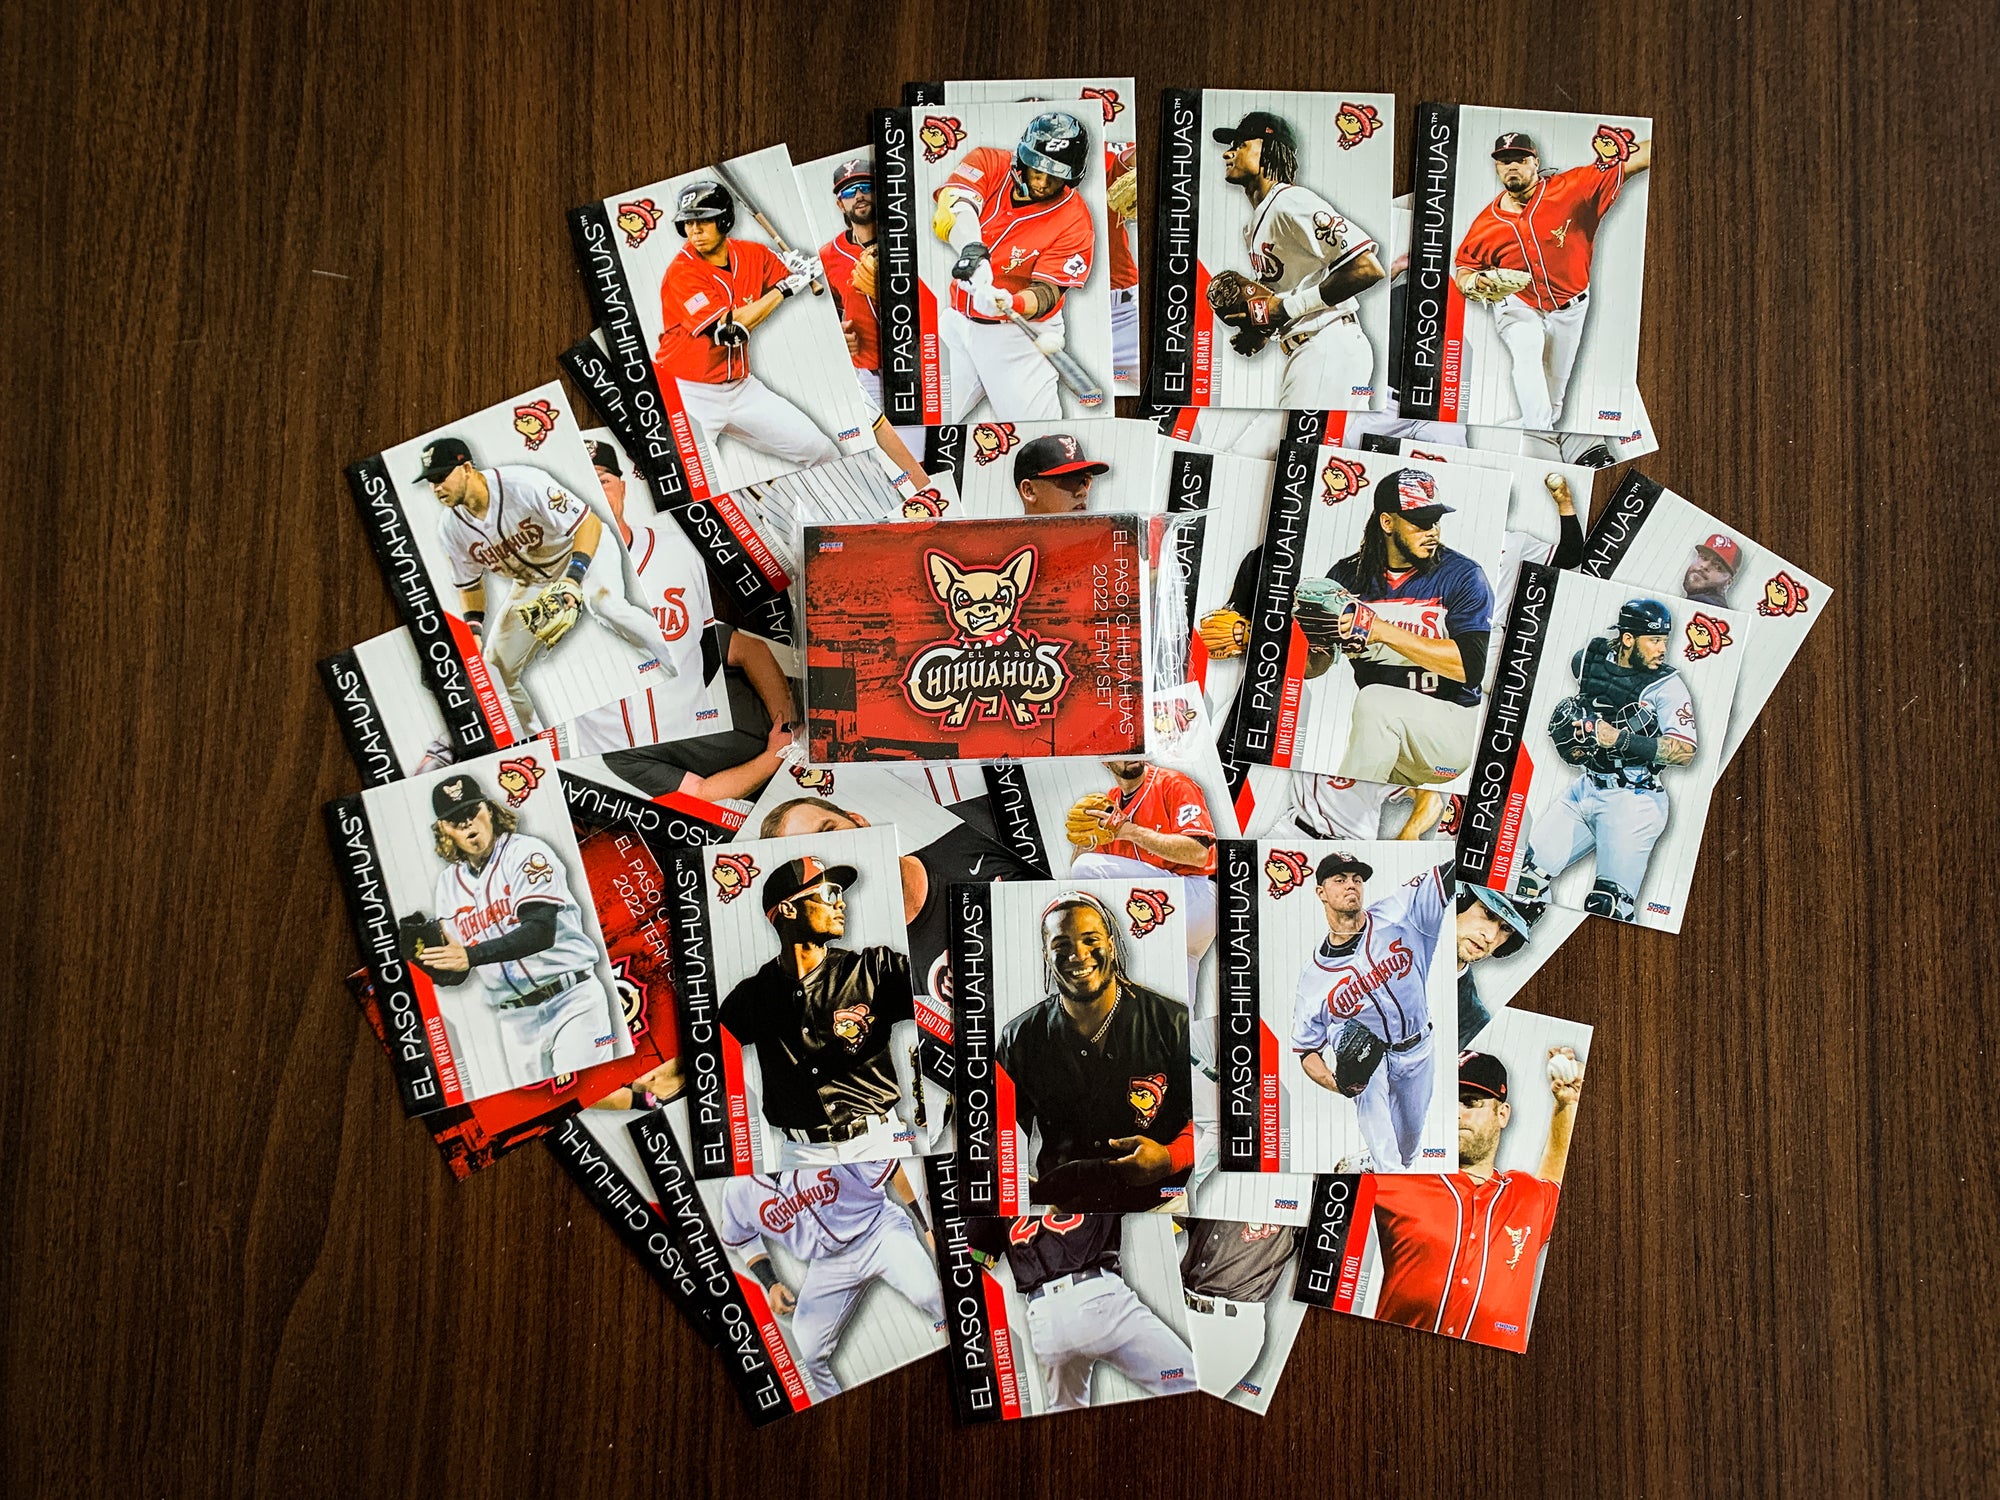 Our Tribute to Selena Night & Jersey - El Paso Chihuahuas